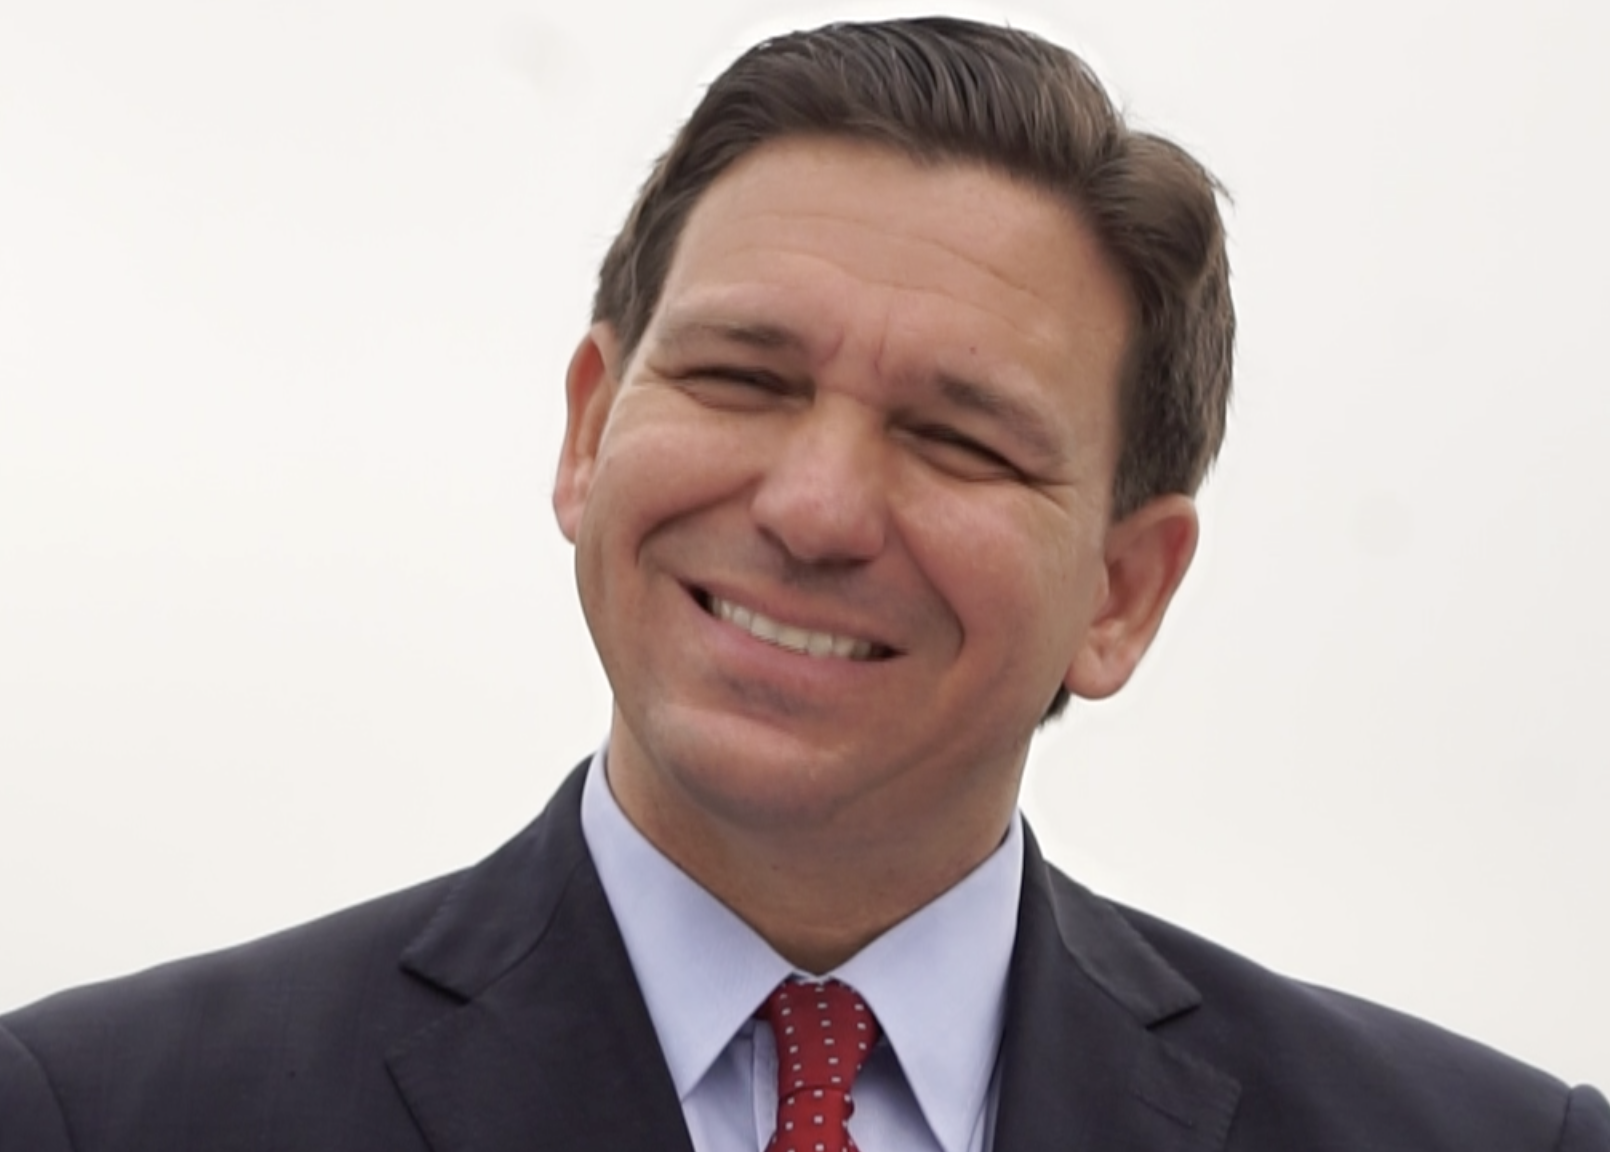 DeSantis Awards Cities With $80 Million in Rebuild Florida Funds, Democrats Call him a 'Fraud'